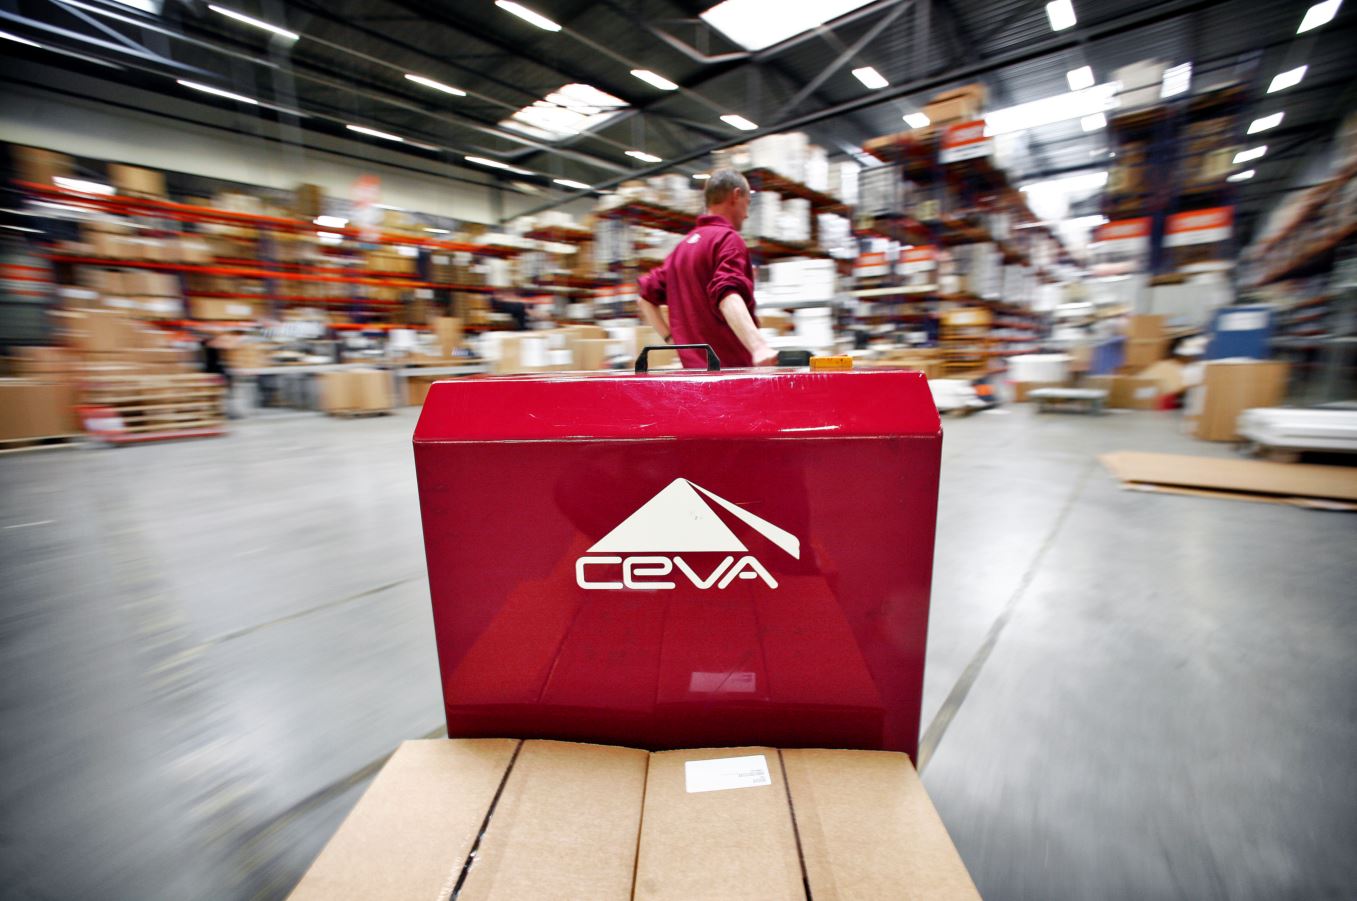 CMA CGM receives regulatory approvals for its investment in Ceva